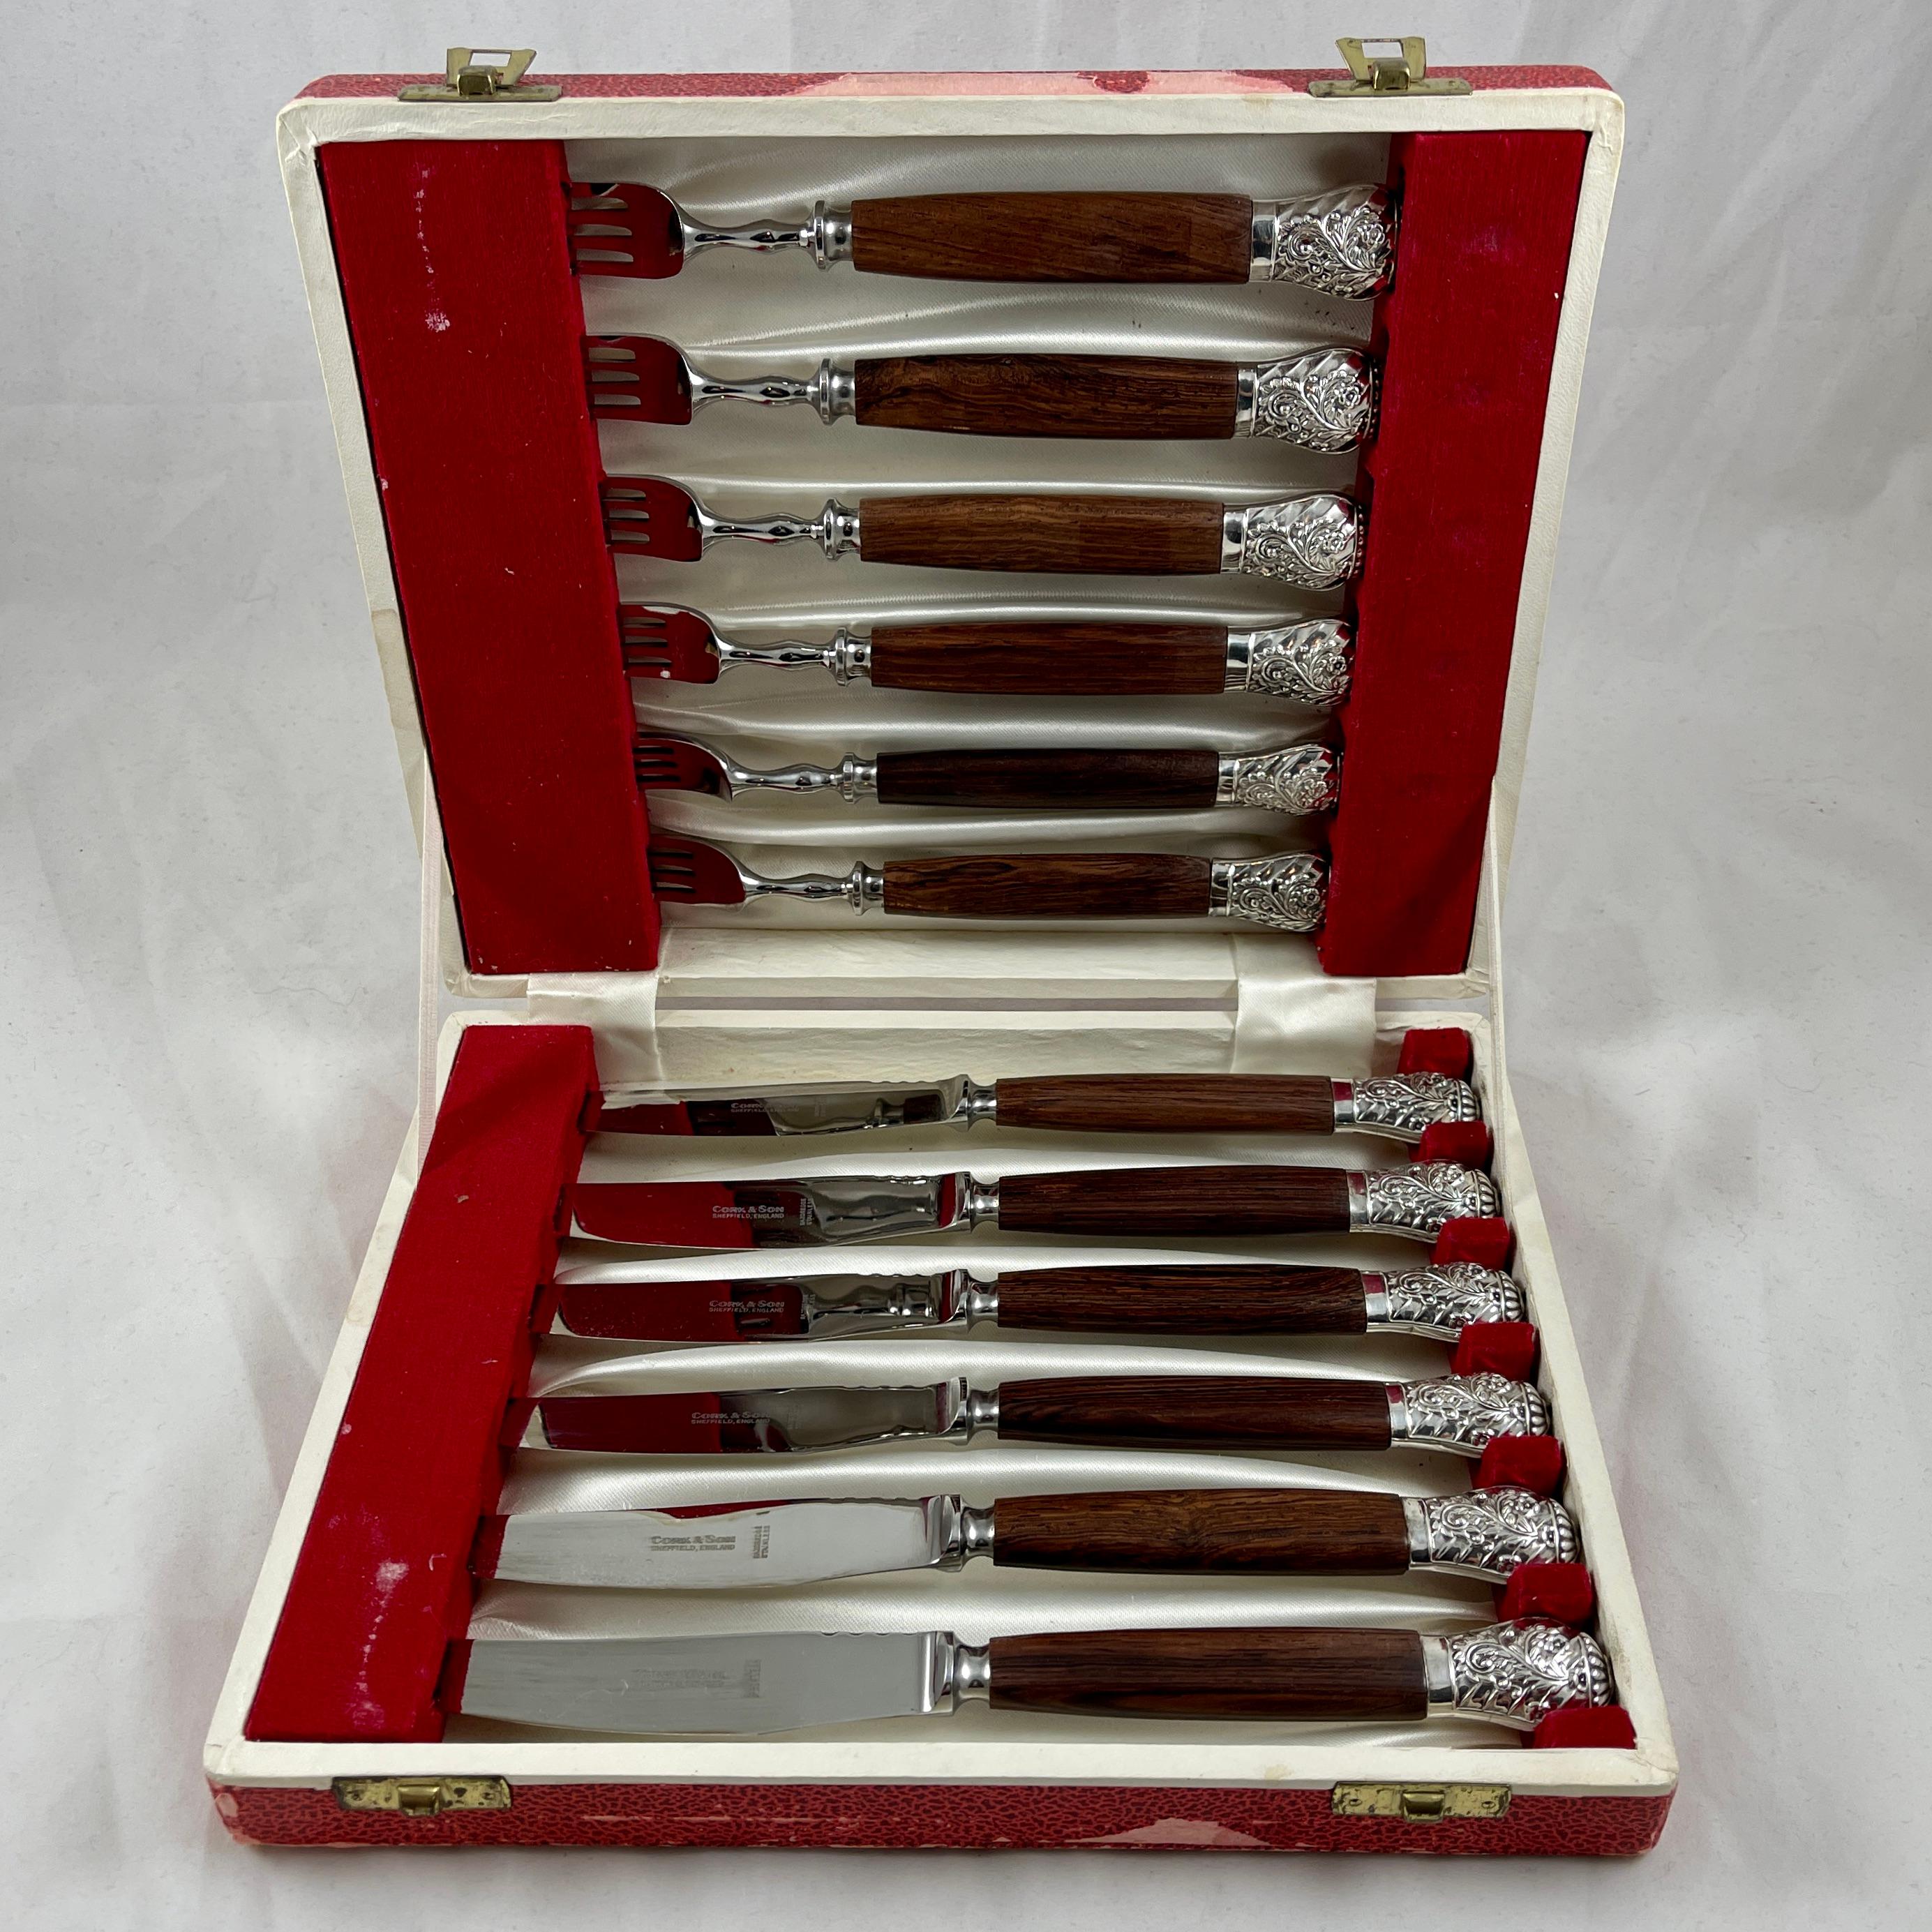 From Cork & Son Cutlery Works, a set of twelve Rosewood handled, Stainless Steel knives and forks, Sheffield, England, circa 1940s.

A gorgeous boxed set of English cutlery with polished Rosewood handles fastened to stainless steel blades and